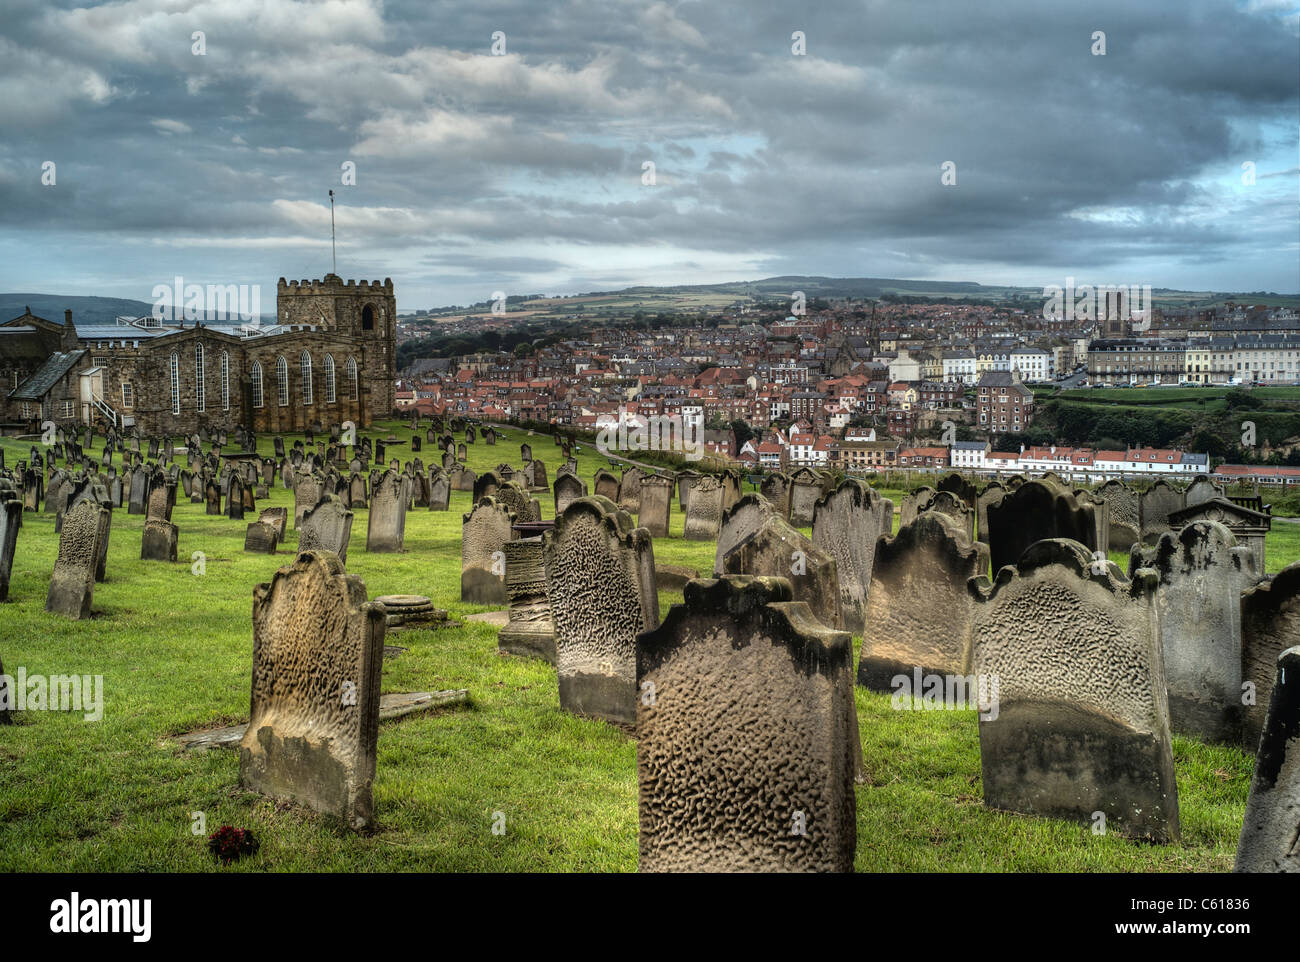 St Mary's churchyard, Whitby, North Yorkshire, UK Banque D'Images